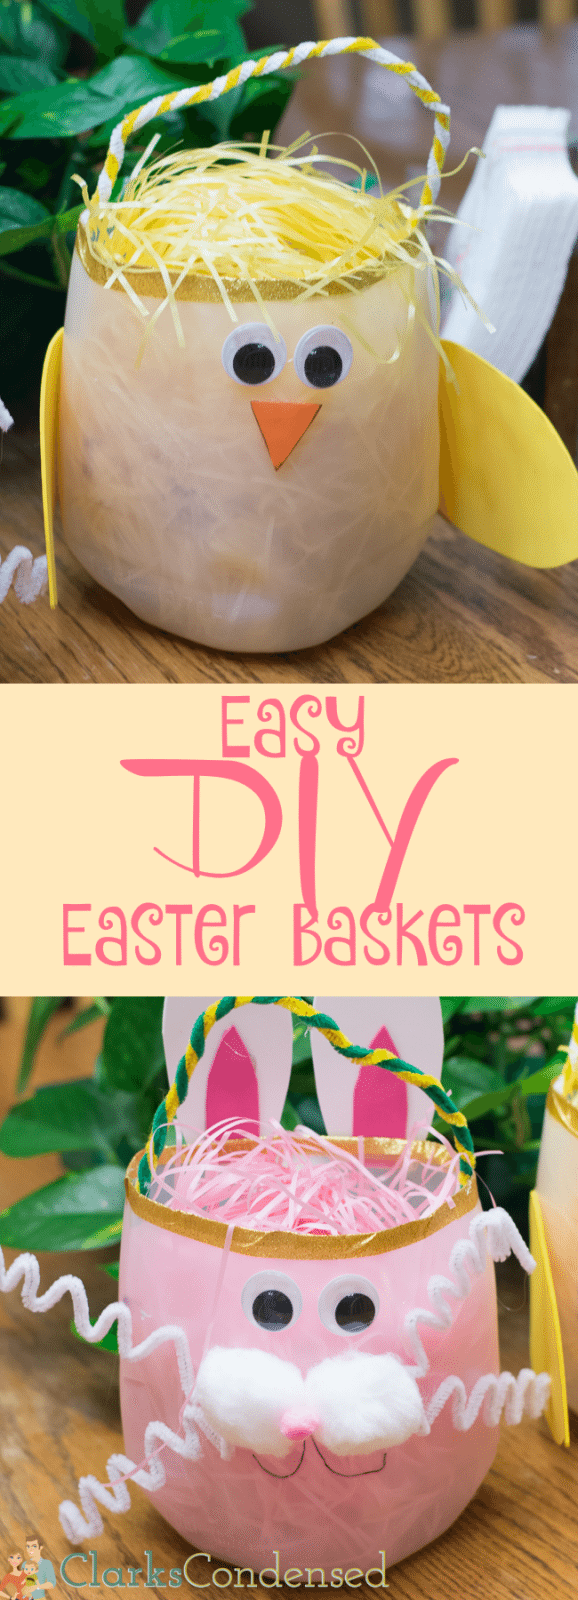 Easy DIY Easter baskets made using empty milk jugs! This is a great Easter craft for kids. 